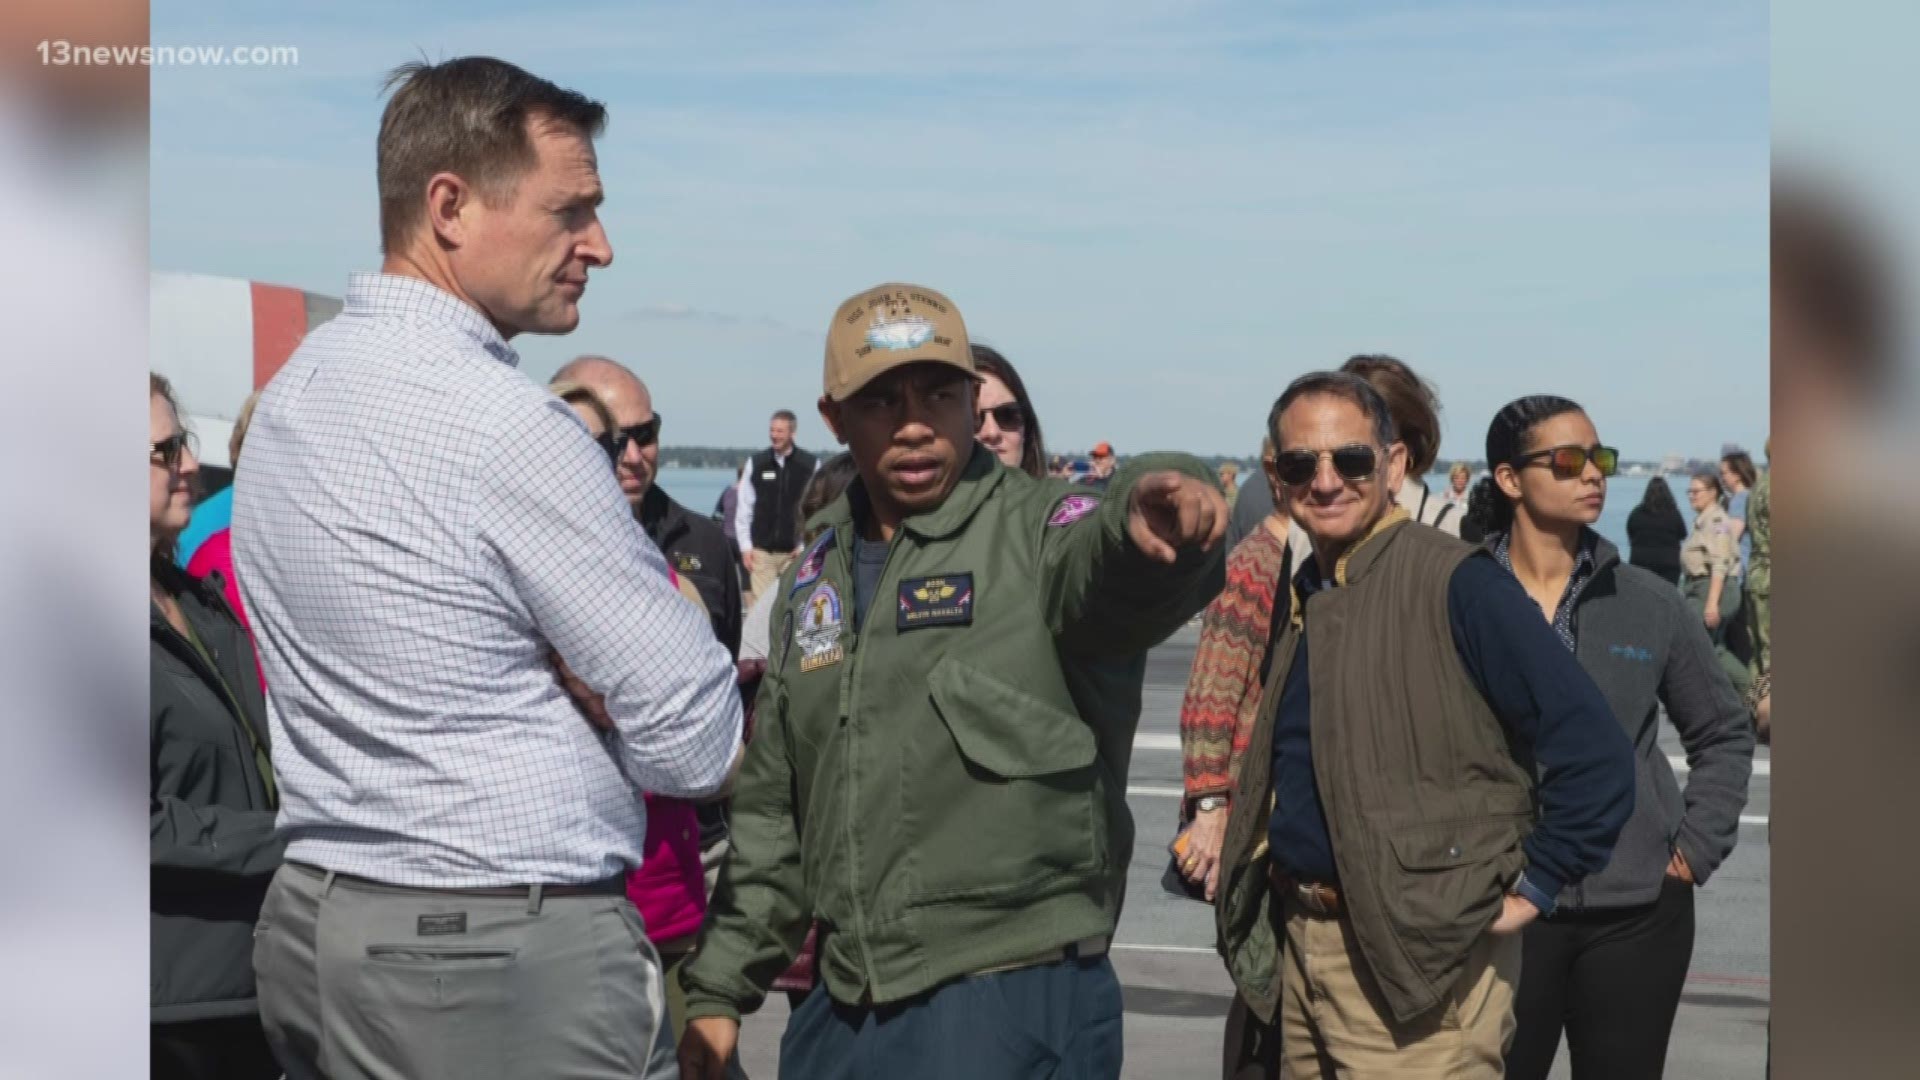 Visitors took photos on the flight deck while sailors gave the public a rare opportunity to understand the capabilities of the aircraft carrier.